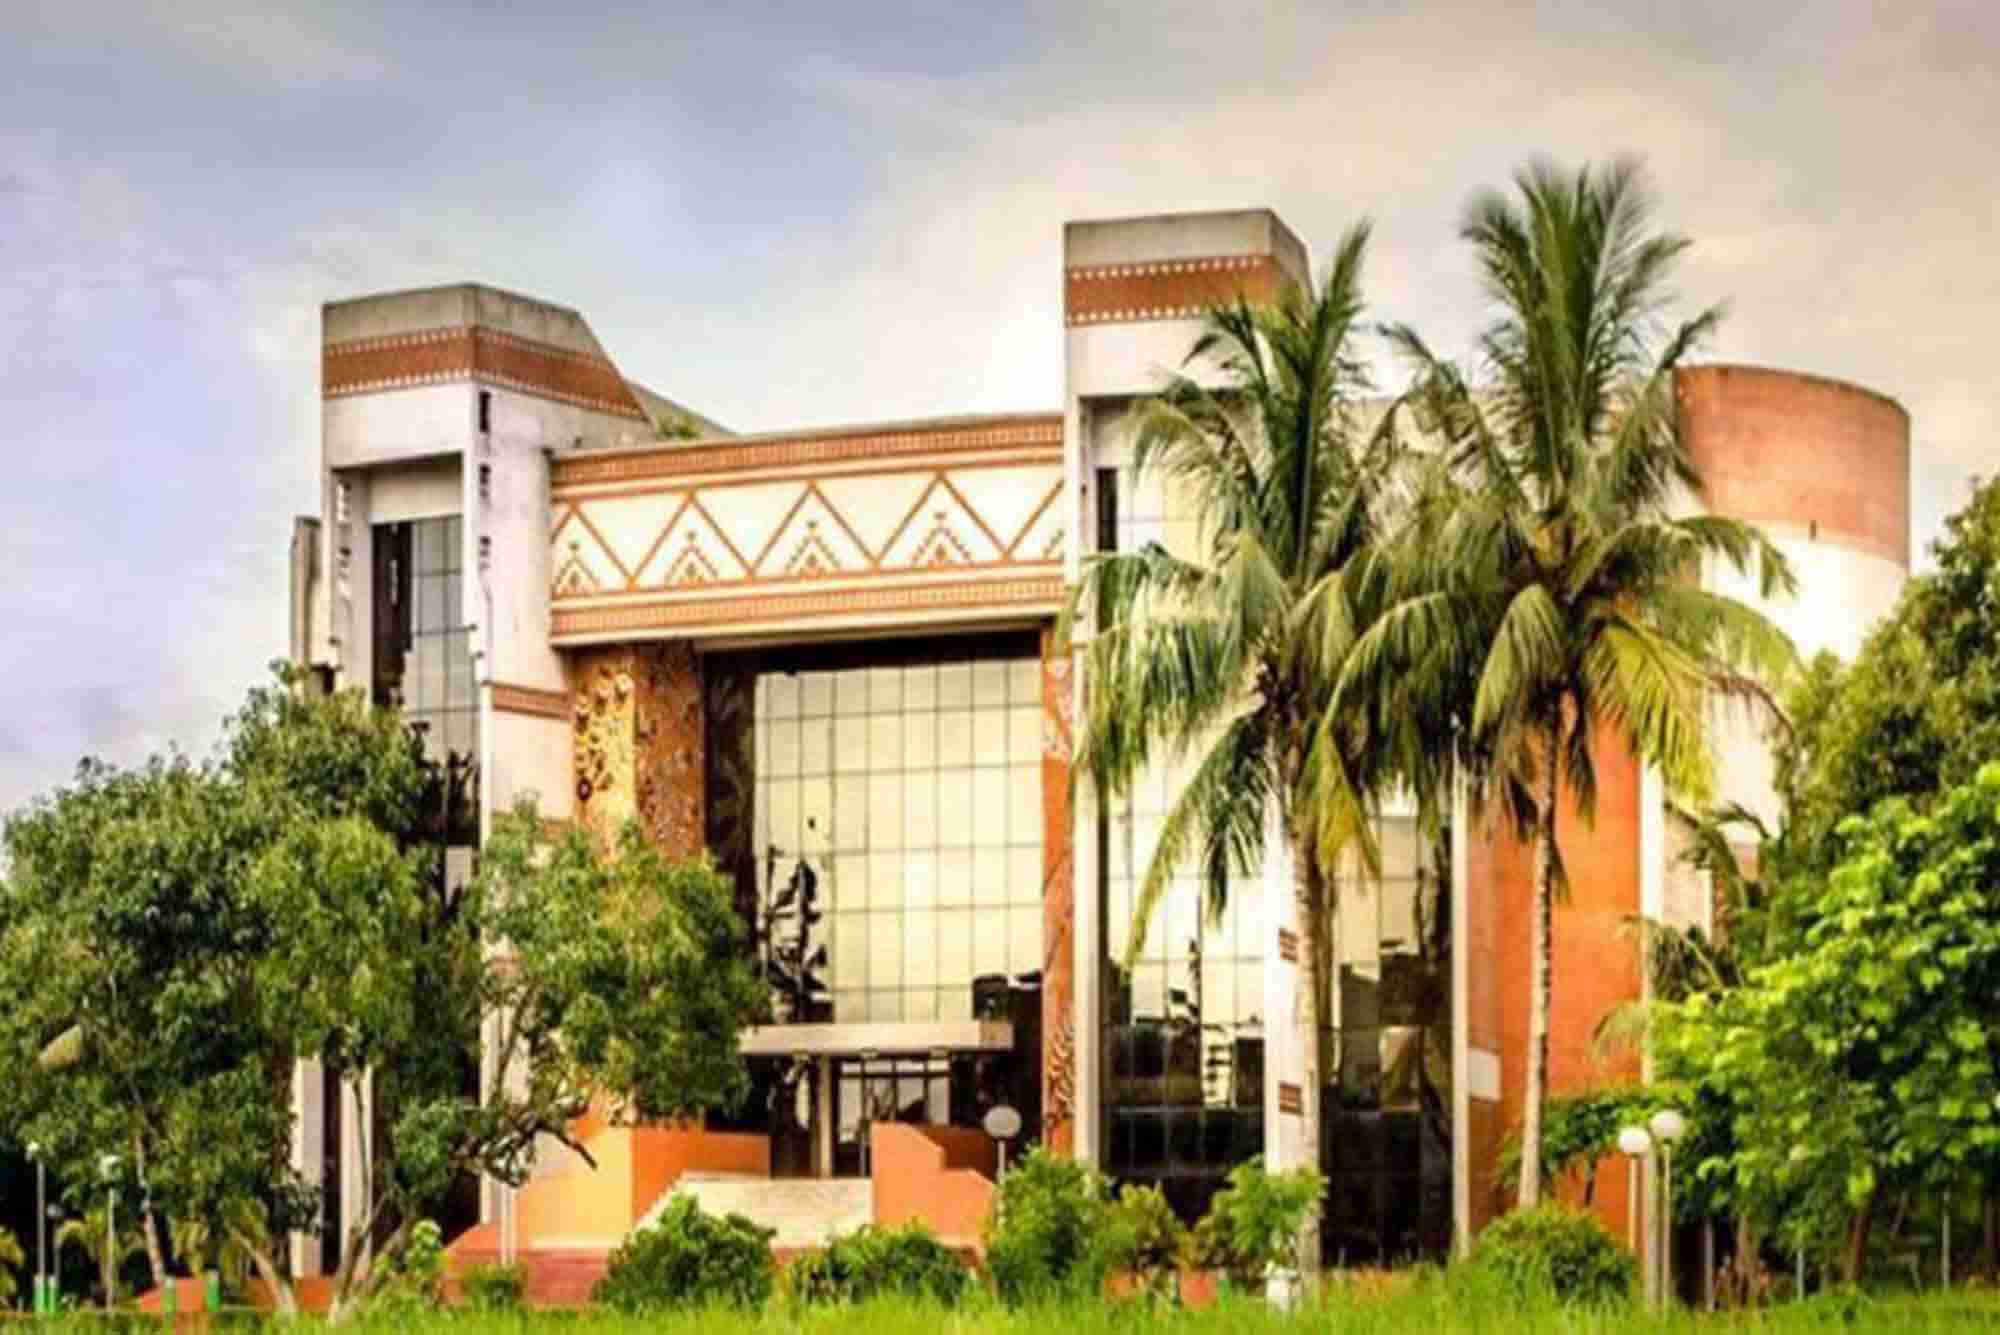 The summer placement drive at IIM Calcutta was completely virtual this year.